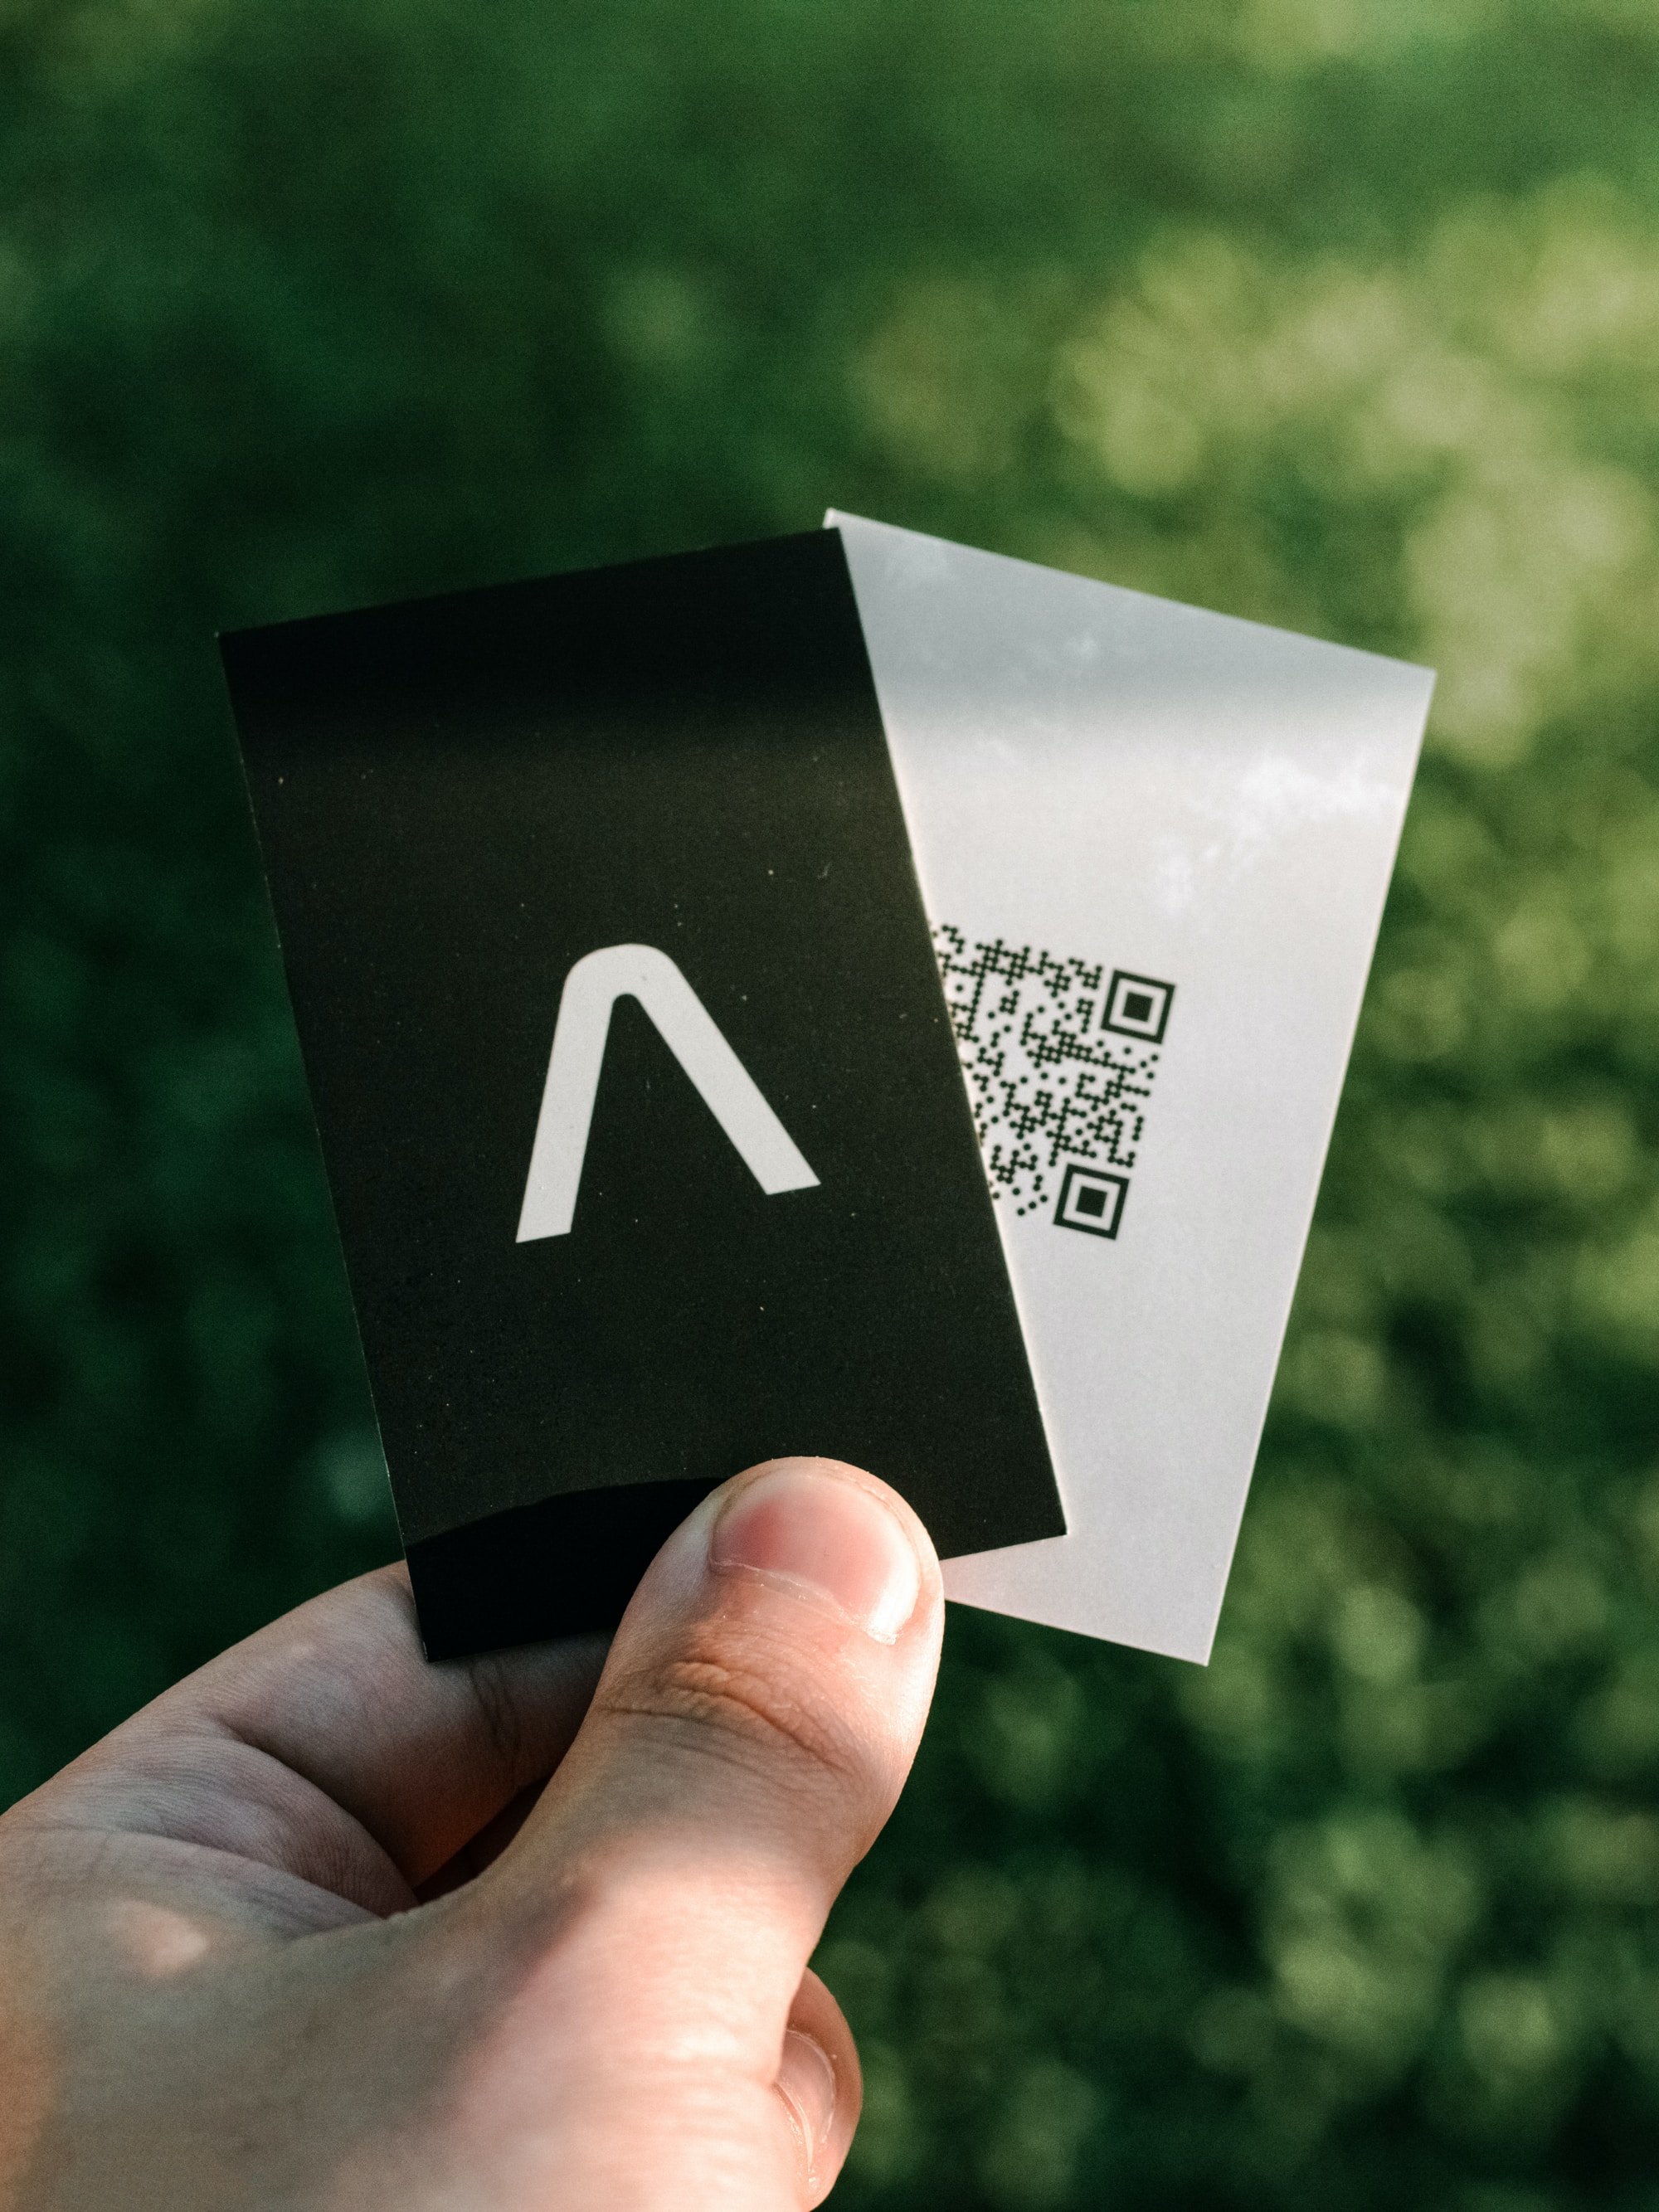 QR codes can be printed on anything from business cards to wedding invites to engage your clients.